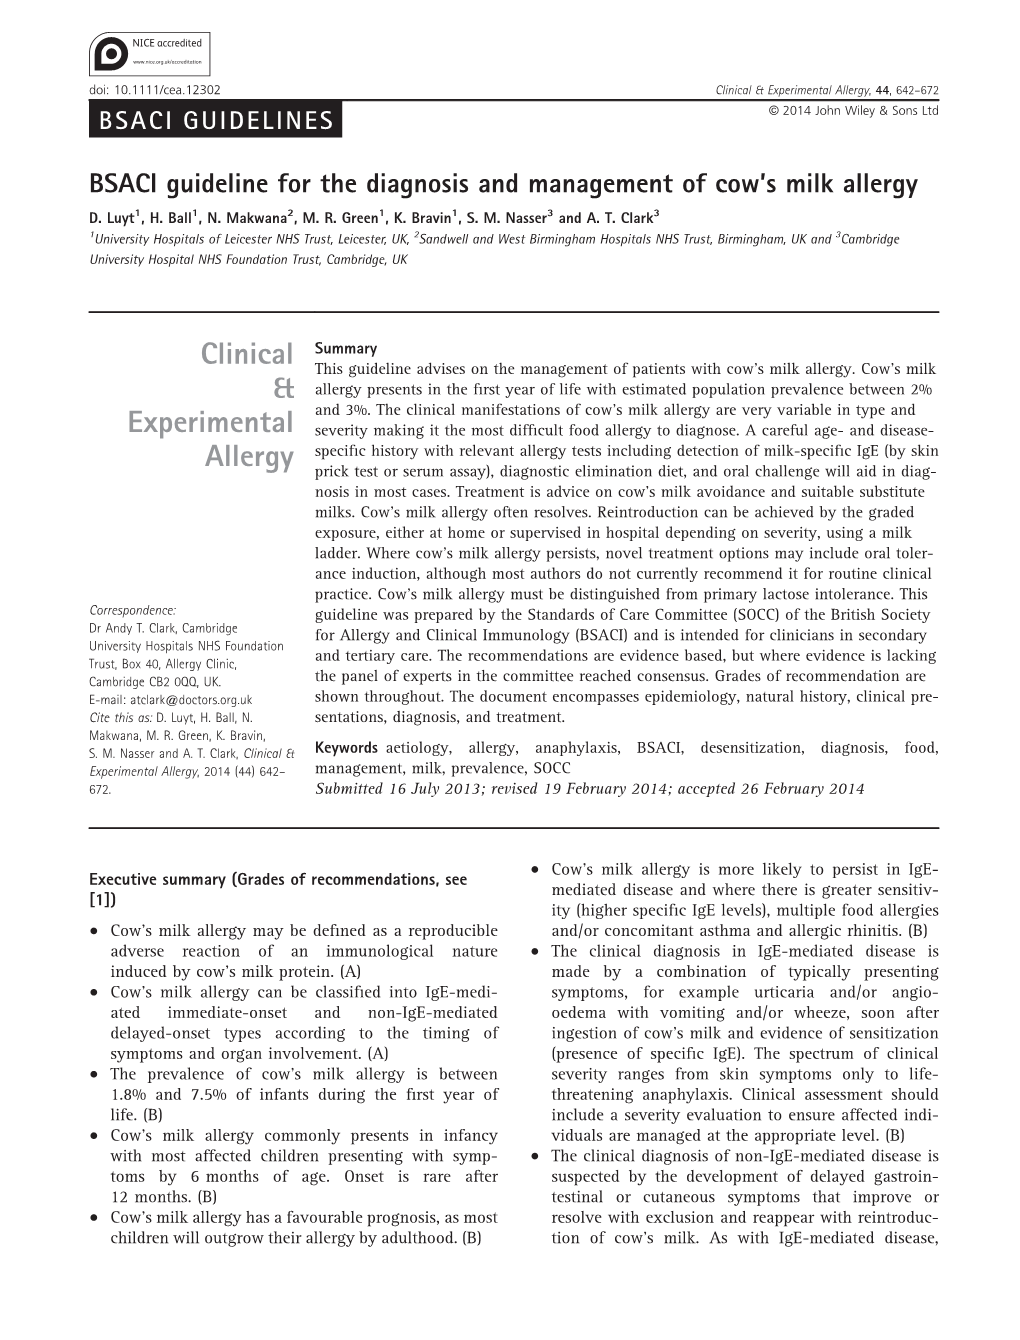 BSACI Guideline for the Diagnosis and Management of Cow's Milk Allergy